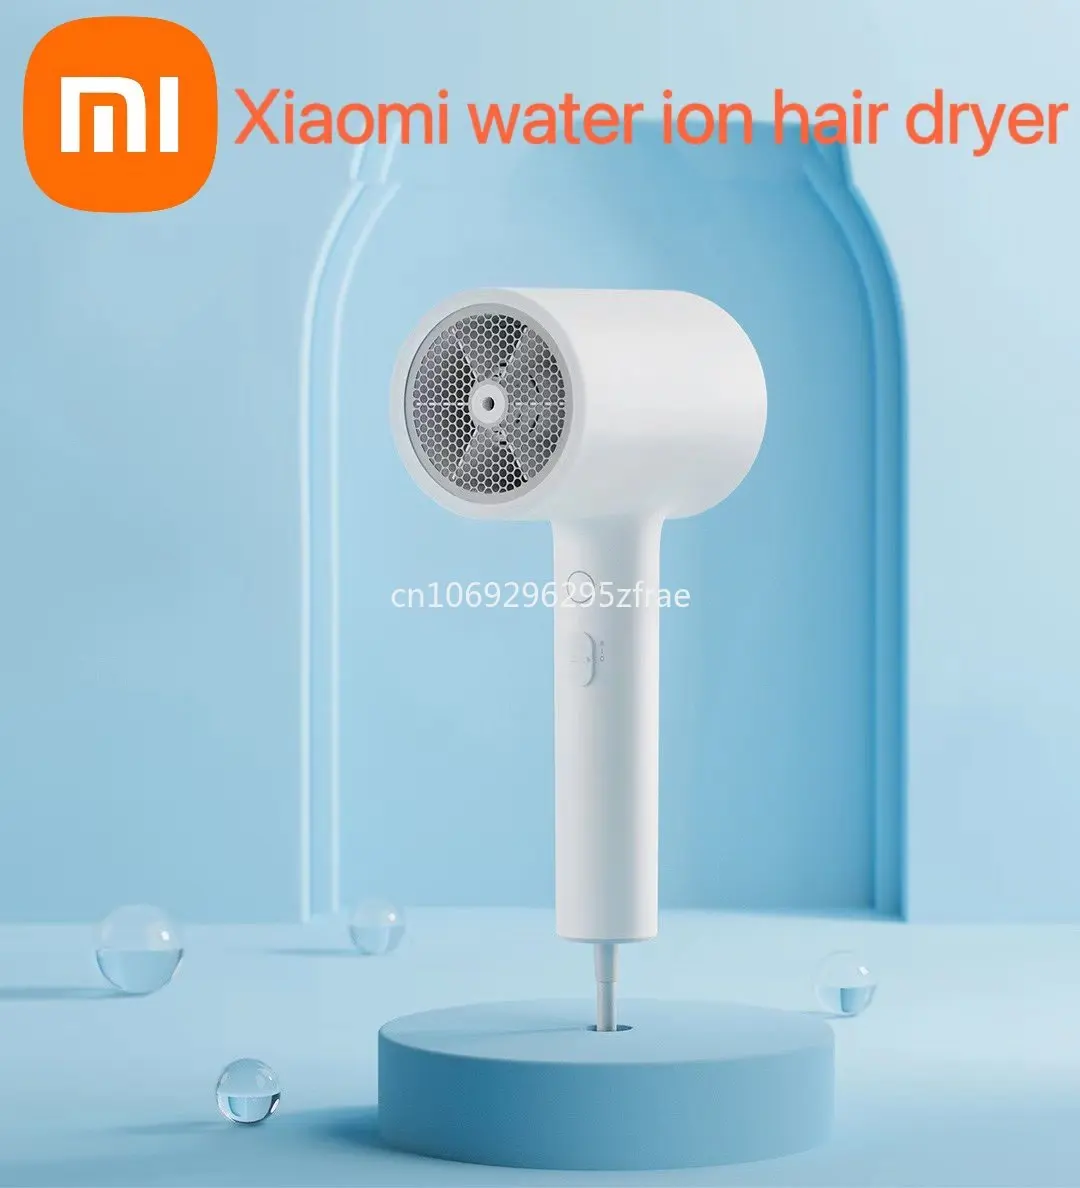 Enlarge 100% genuine Xiaomi Mijia water ion hair dryer, NTC intelligent temperature control cooling and heating cycle Xiaomi hair dryer